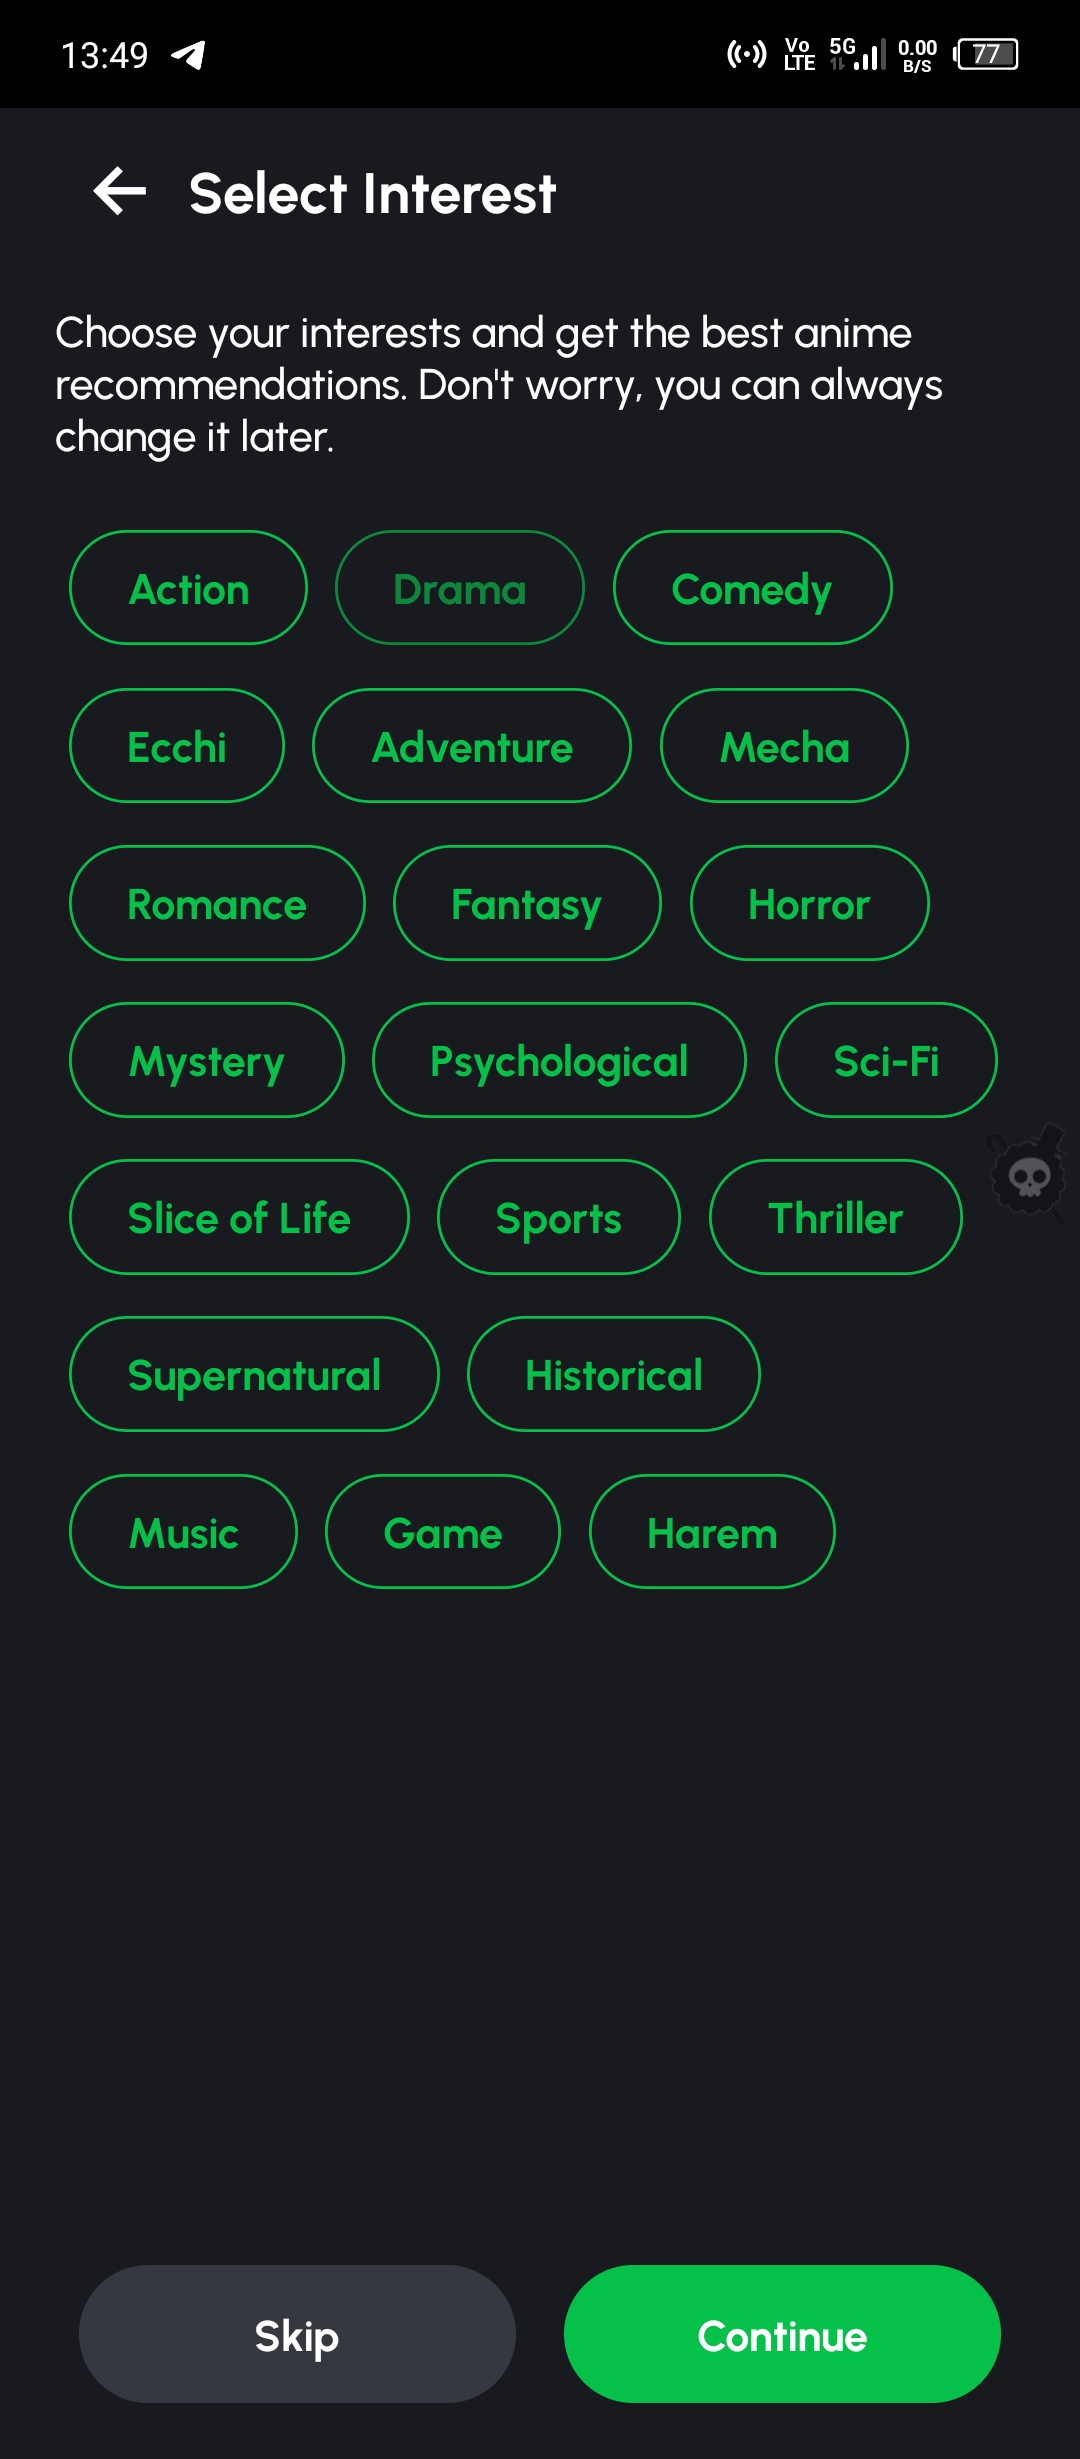 Select your preferred Genre to get recommendations 